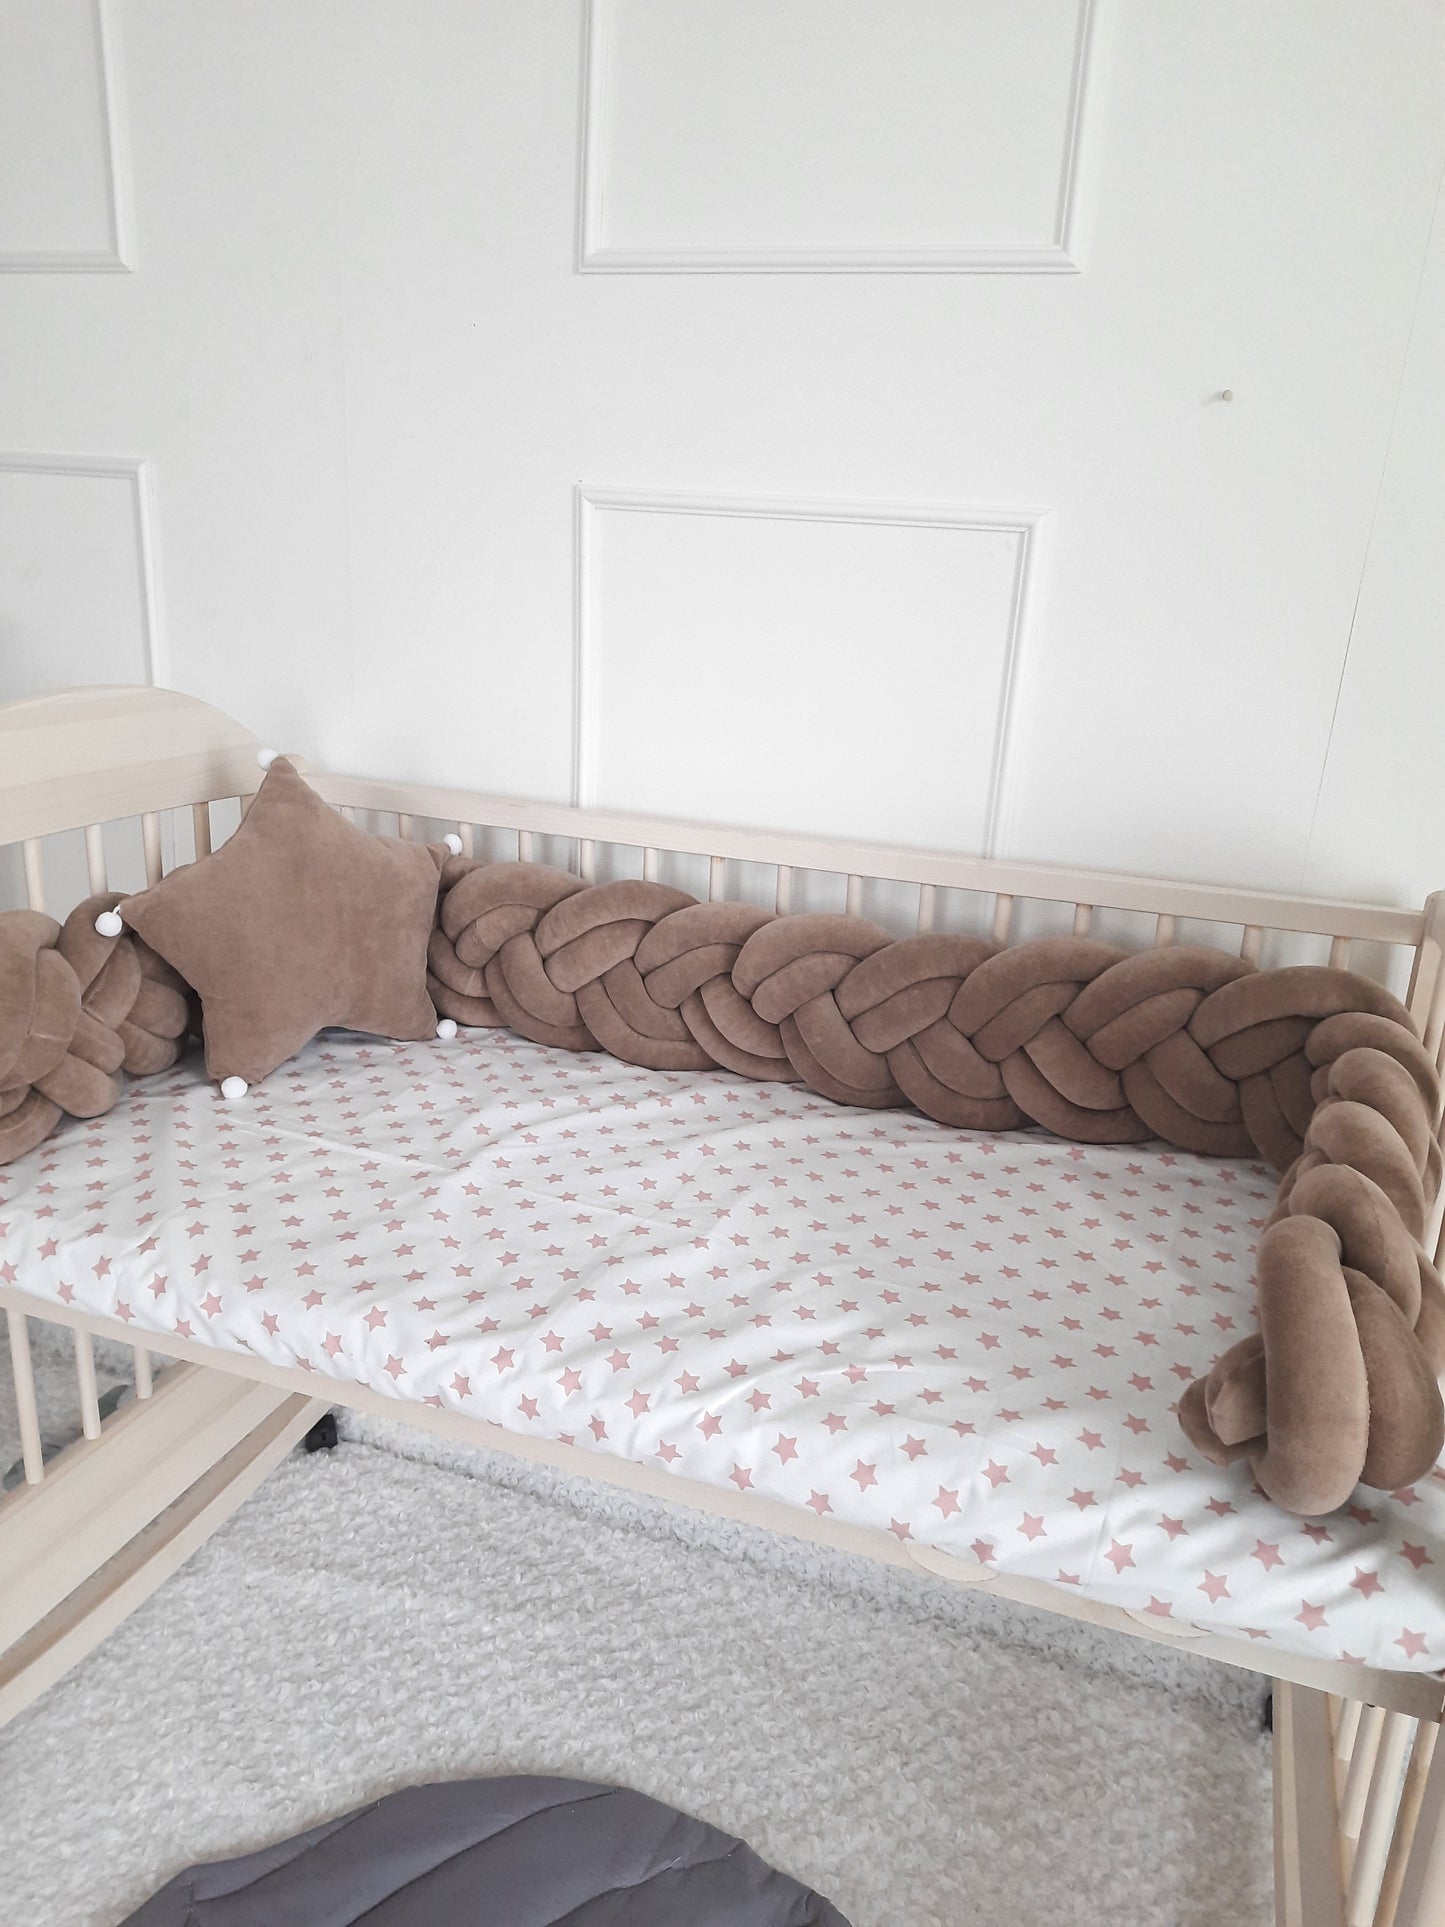 Brown double braided bumper with brown star pillow as a gift on the crib. 100% velor cotton braided crib bumper. Hypoallergenic material with OEKO-TEX certificate